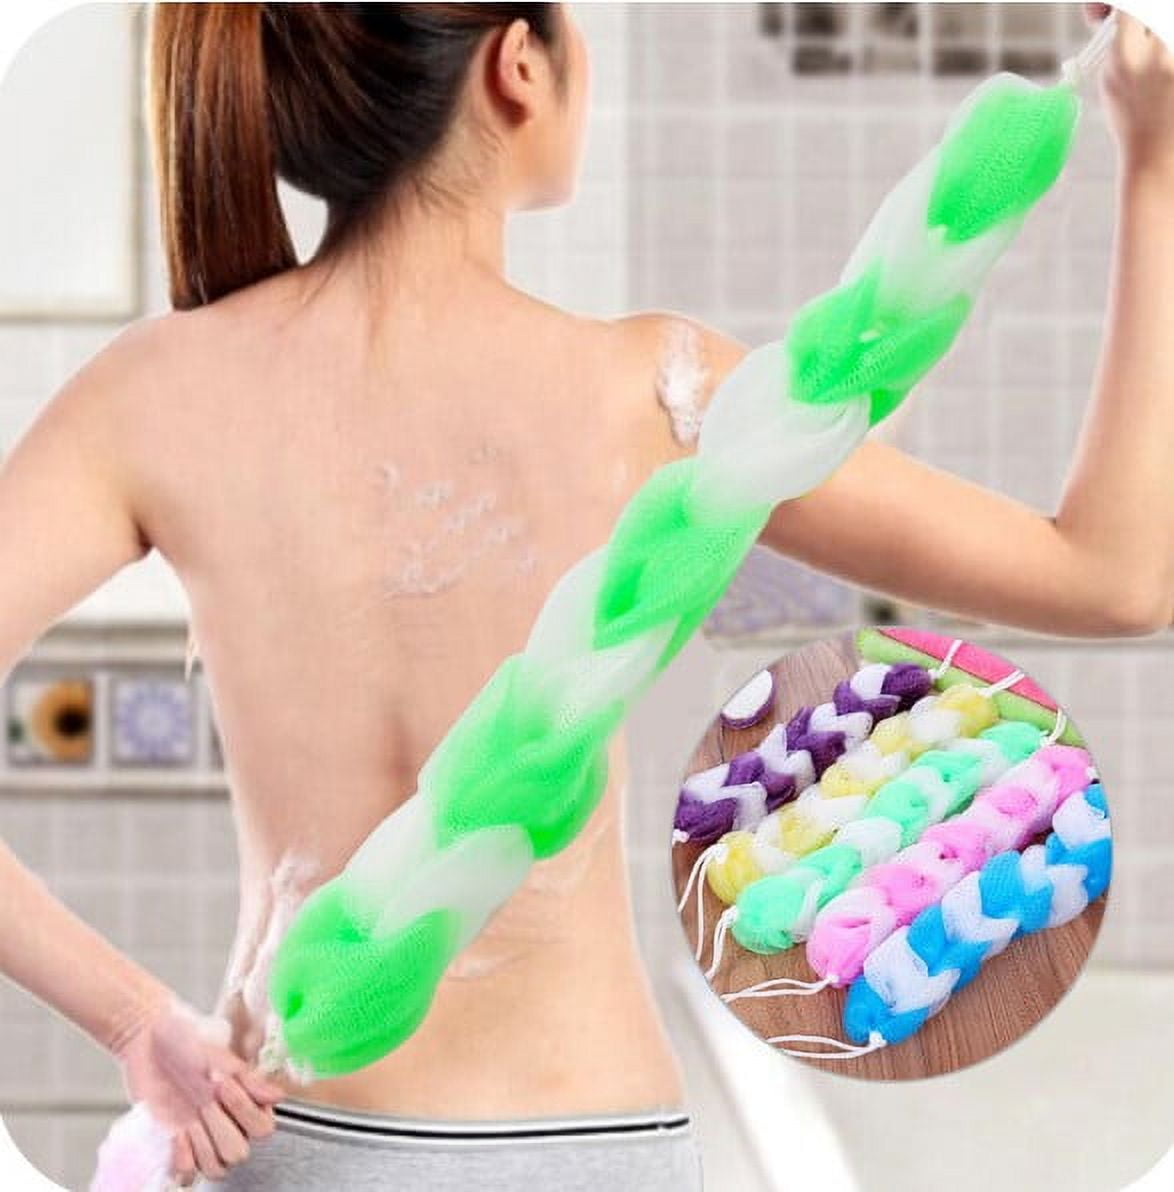 Long Handle Back Scrubber For Shower Cleaning Back Scrubber, 1Pc Green  Fashion Long Handle Pp Body Cleaning Tool For Shower